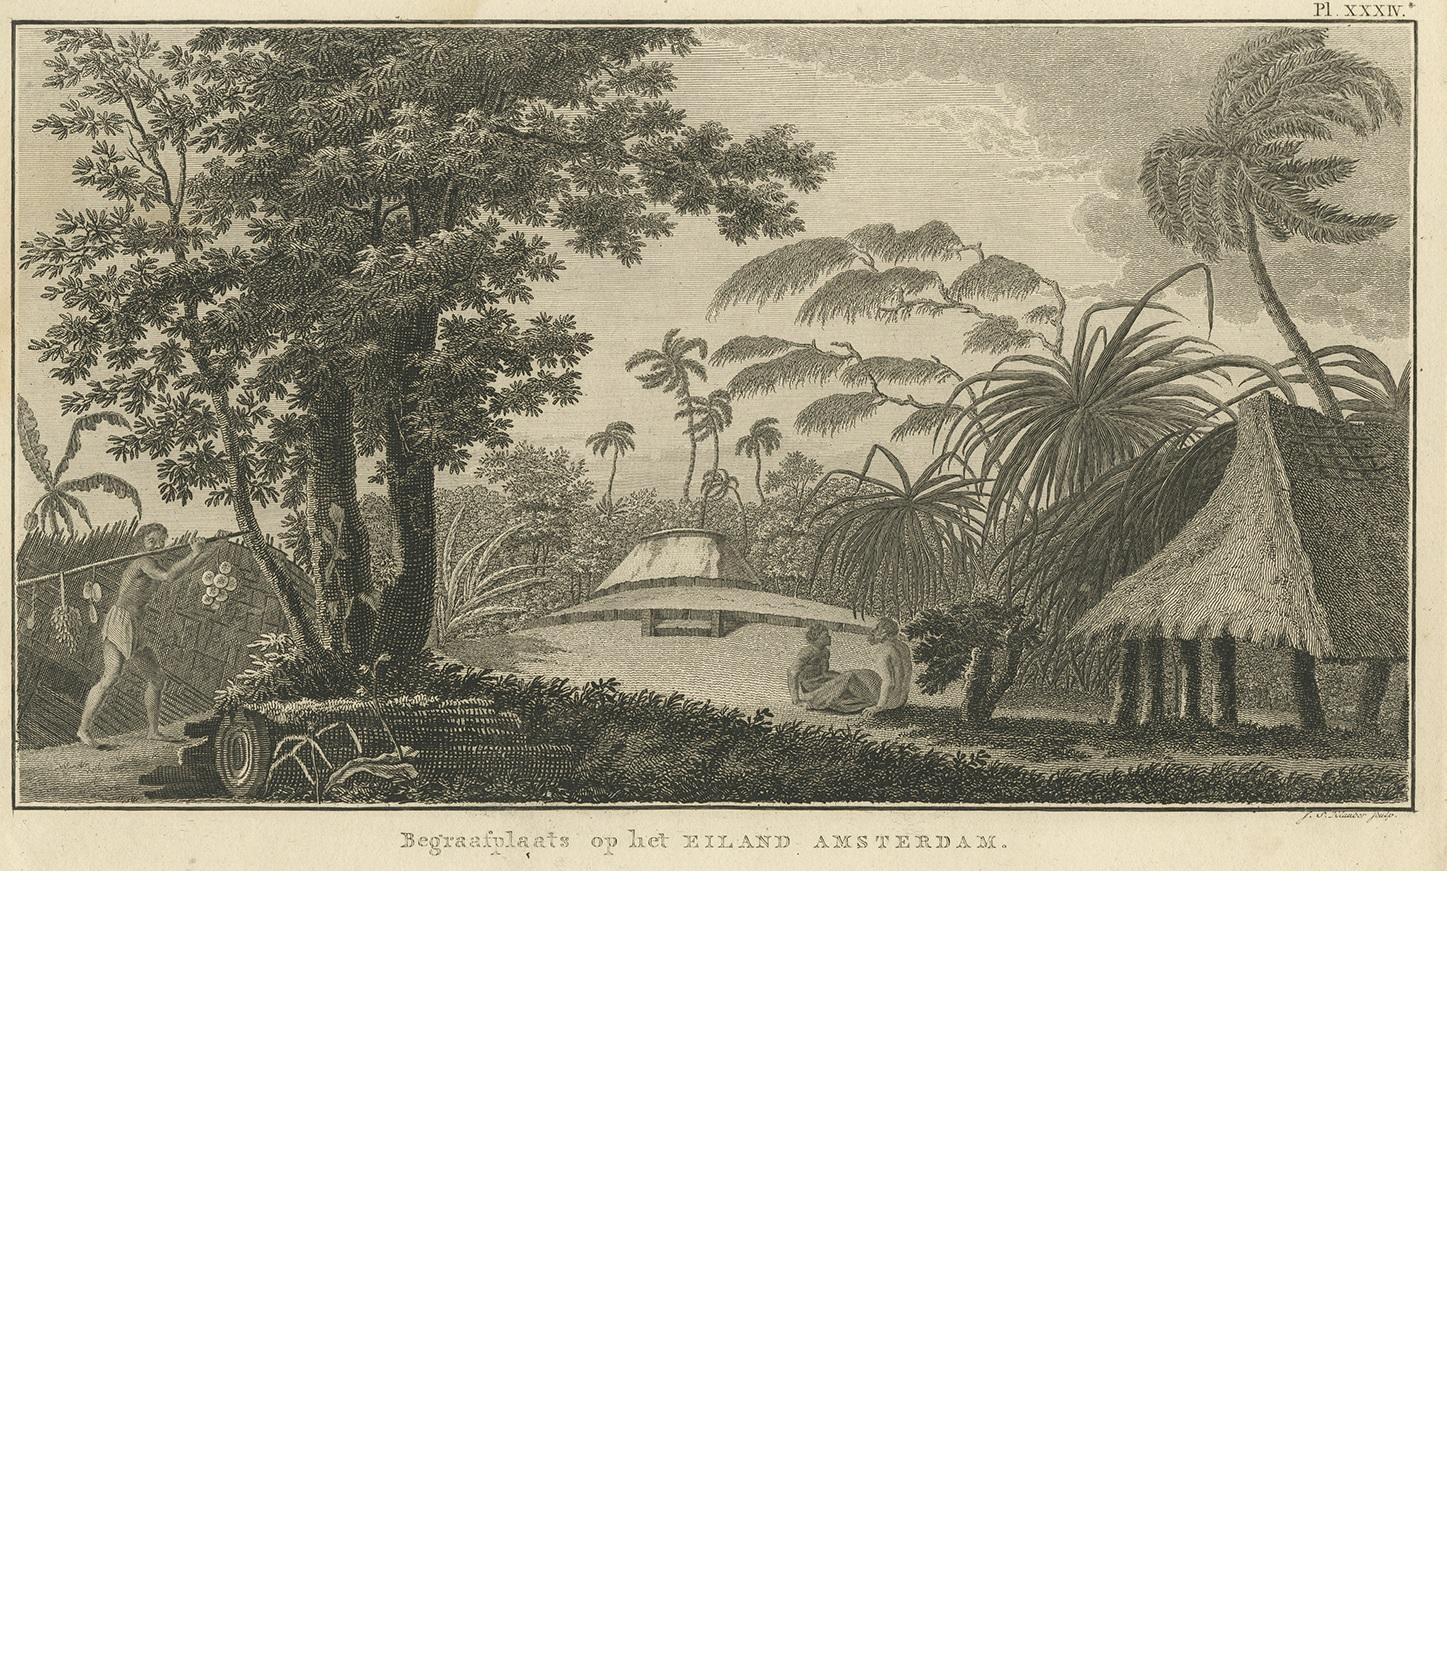 Antique print titled 'Begraafplaats op het EIland Amsterdam'. Engraved view of a local cemetery on Amsterdam Island, a small French territory in the southern Indian Ocean. Engraved by J.S. Klauber.